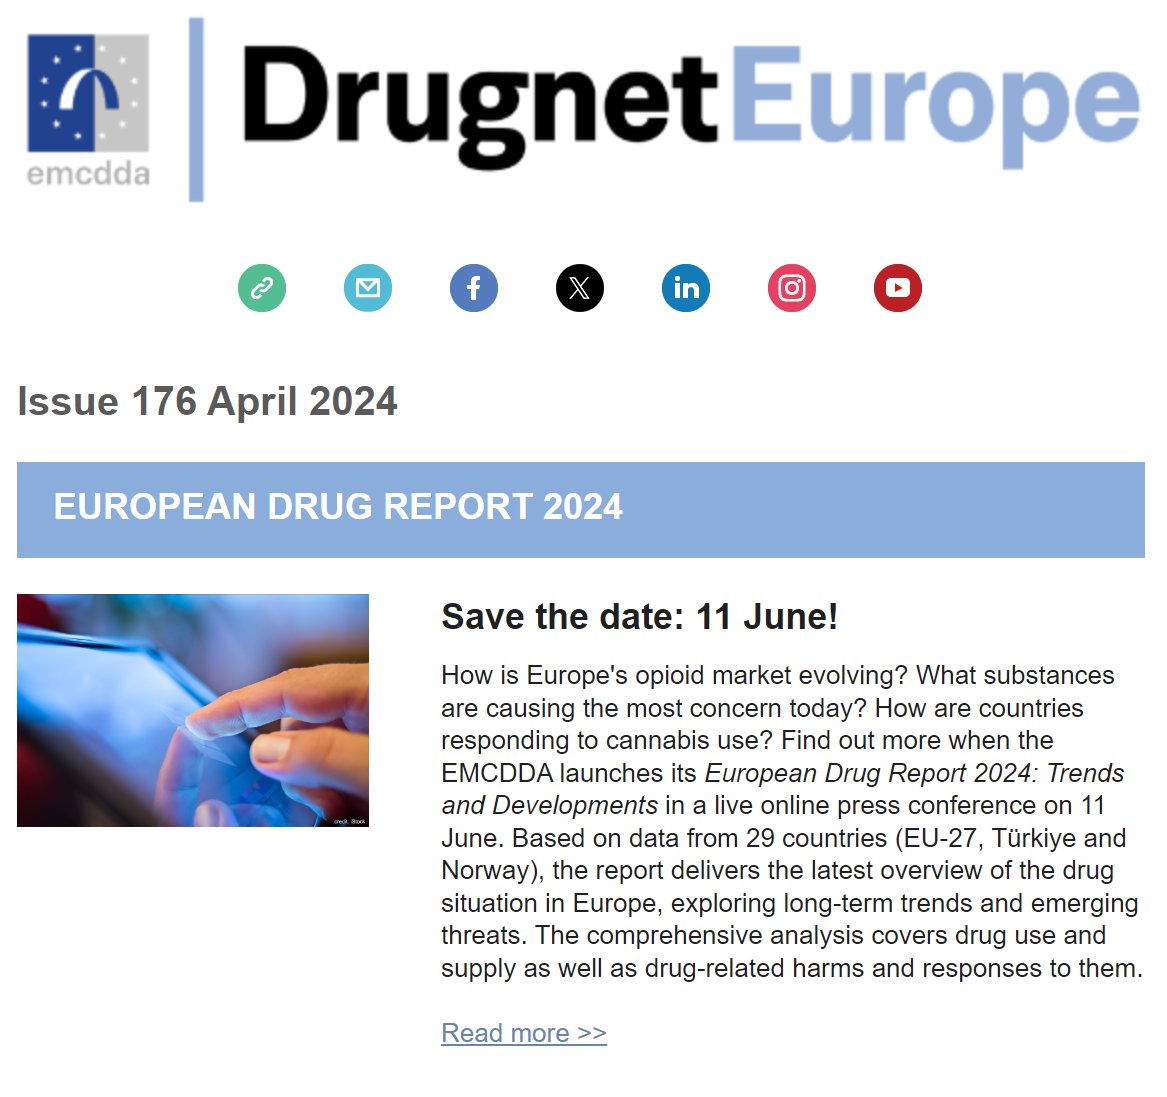 Our April news round-up is out today. In this issue: European Drug Report 2024 coming soon, new miniguide and upcoming webinar on drug consumption rooms, key deadlines and new jobs! mailchi.mp/emcdda/drugnet…